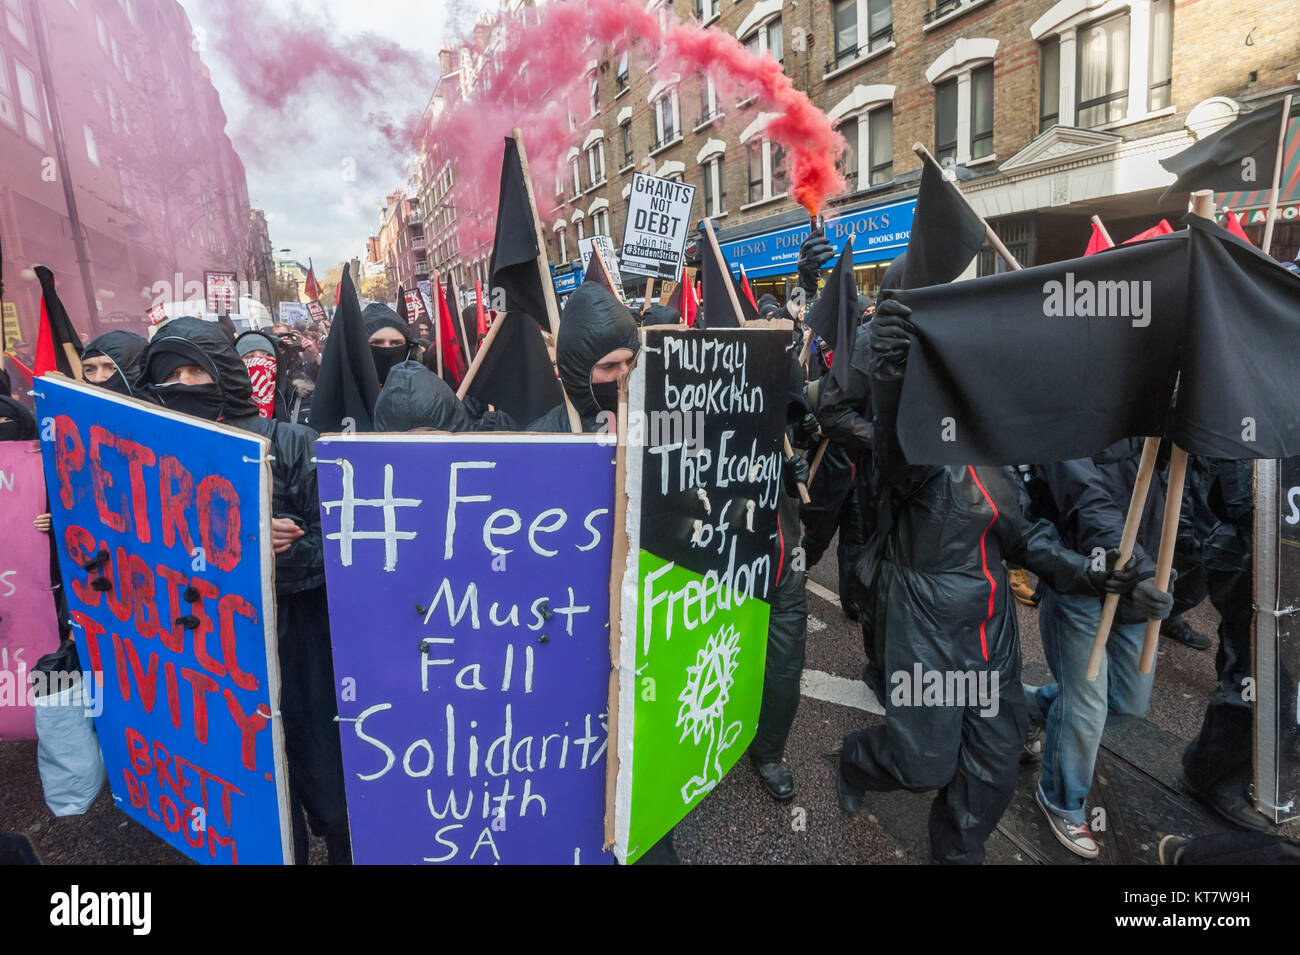 Black bloc students who were led by a 'Book bloc'  let of several smoke flares on the NCAFC Student march for free education - No Barriers, No Borders, No Business. Stock Photo